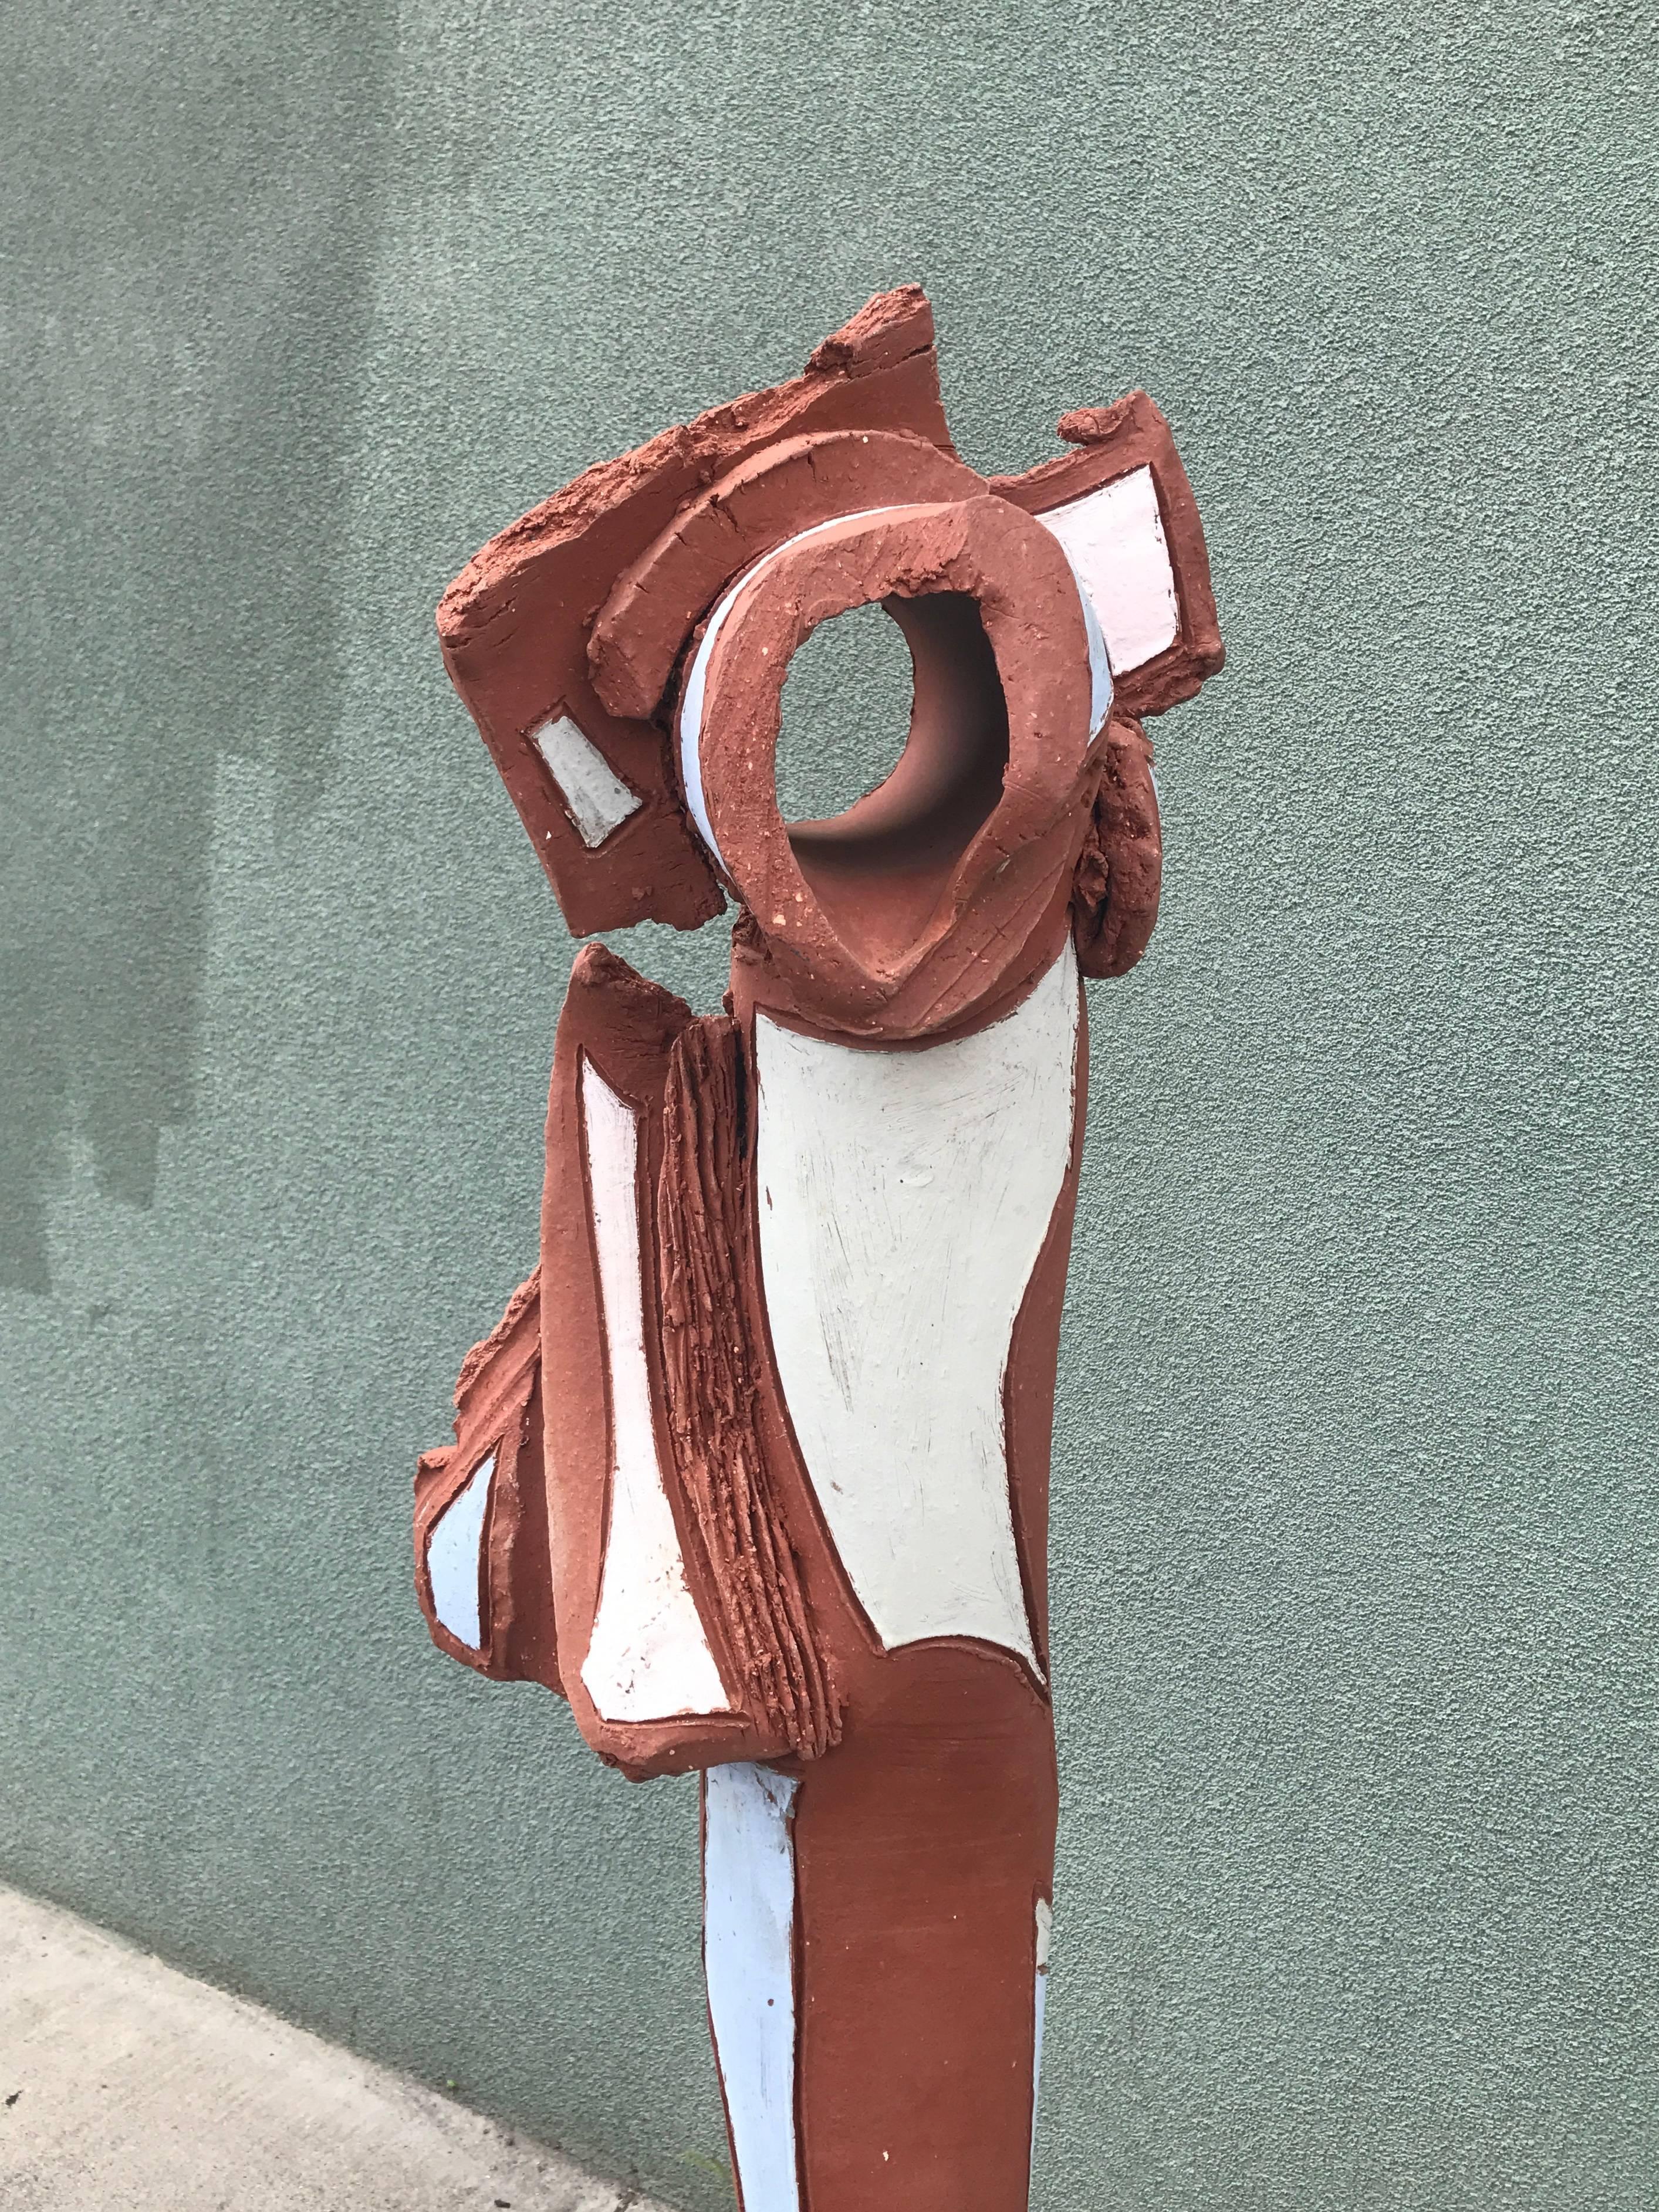 Bay Area Large Glazed Ceramic Abstract or Brutalist TOTEM Sculpture #2 In Excellent Condition For Sale In San Francisco, CA